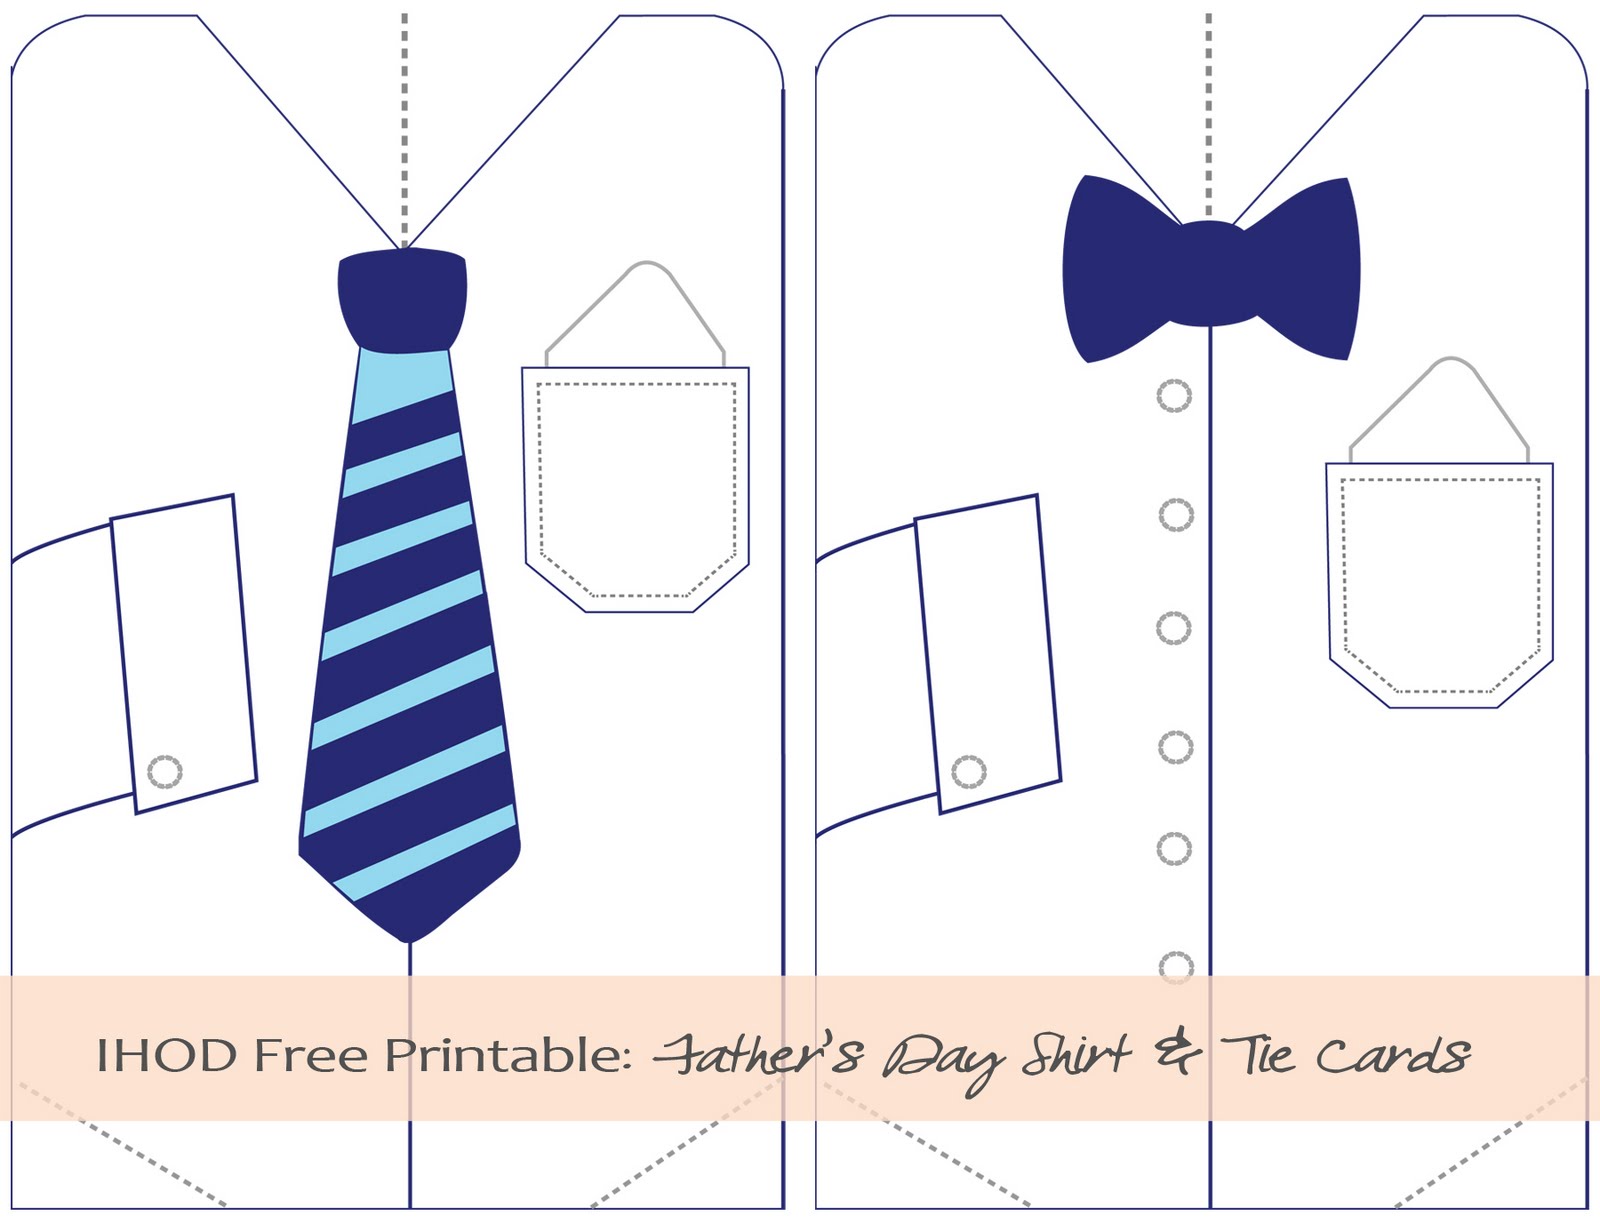 diy-free-printable-father-s-day-shirt-tie-card-in-honor-of-design